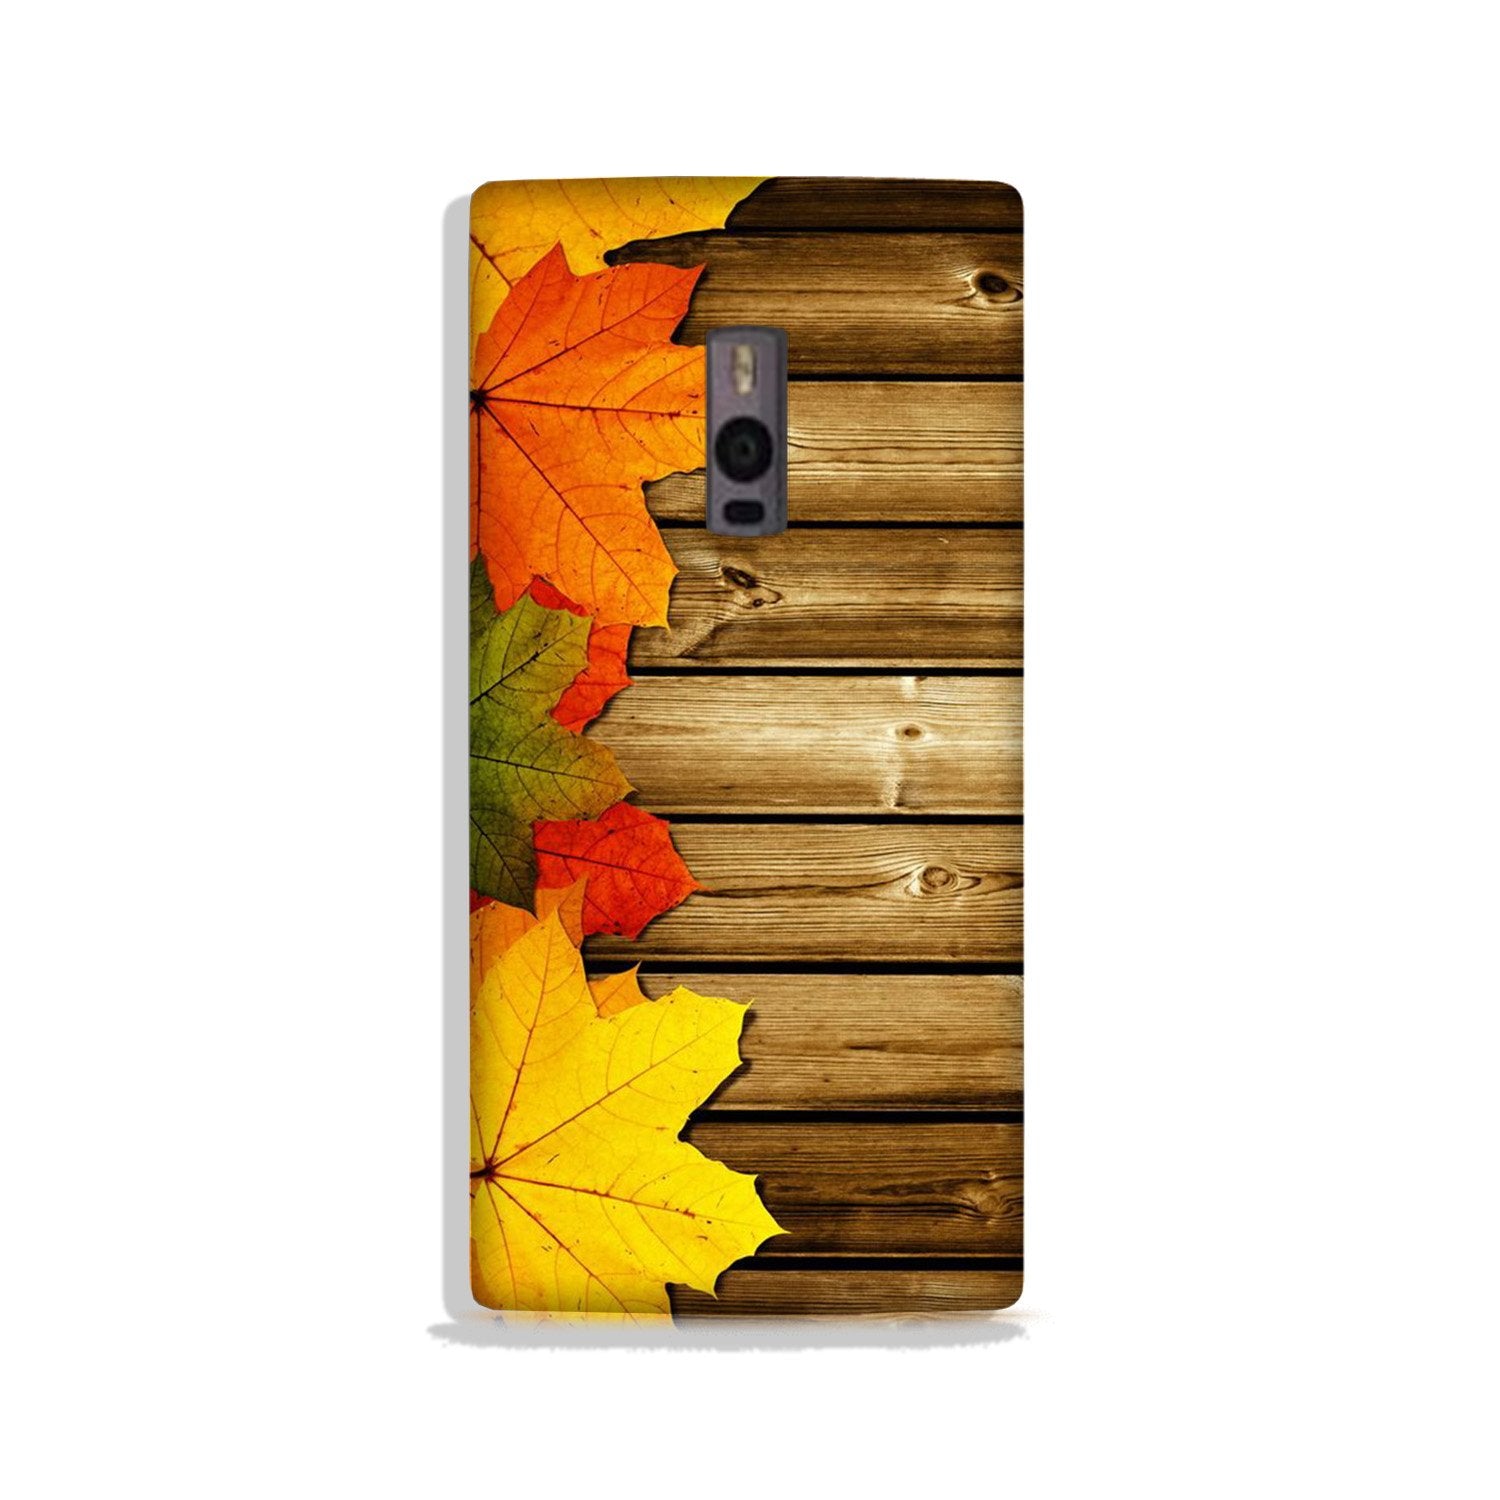 Wooden look3 Case for OnePlus 2